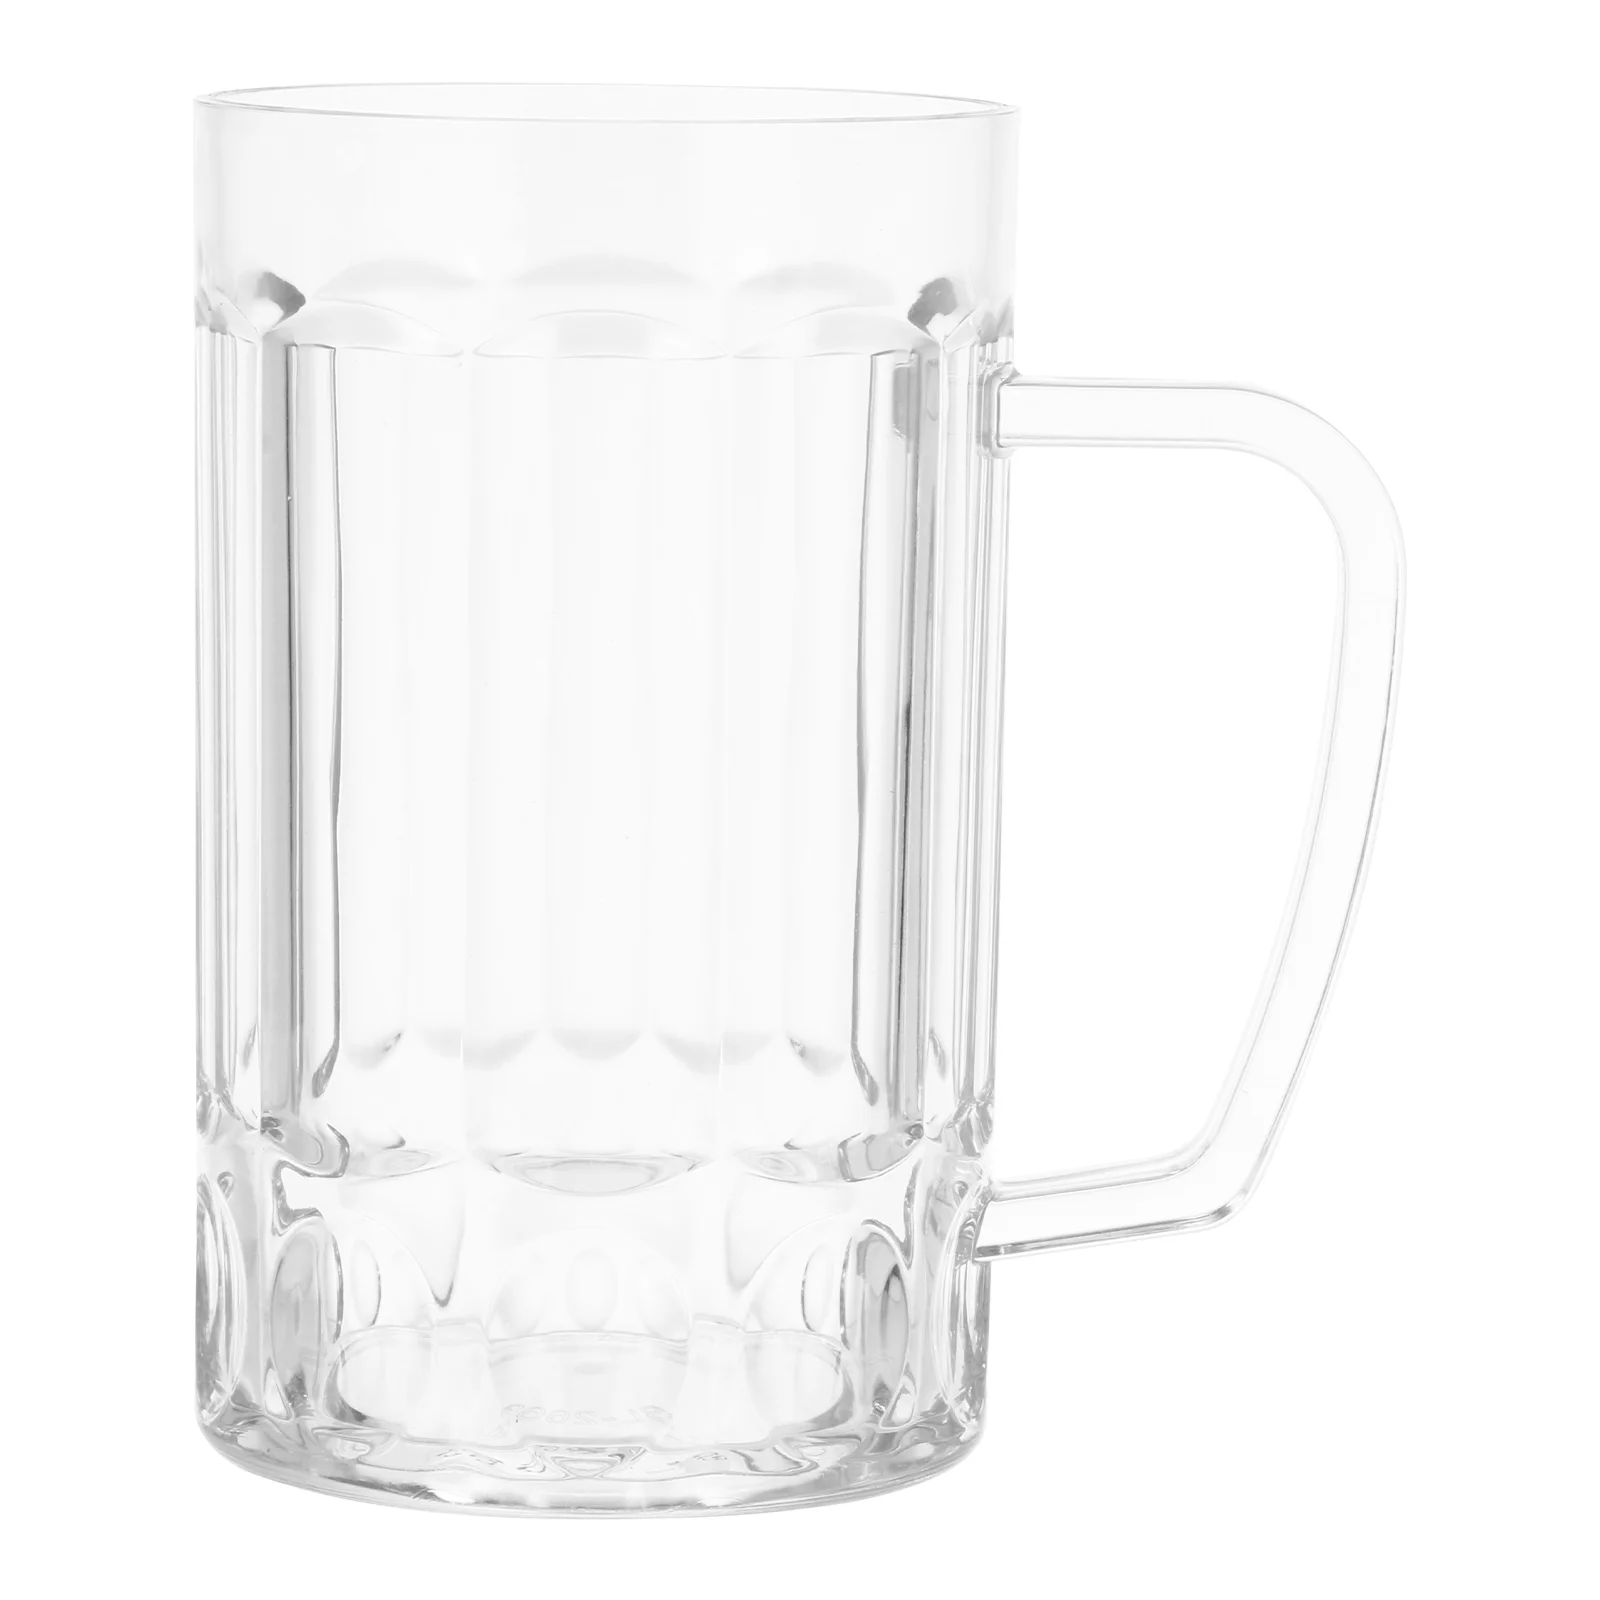 

540ml Transparent Handgrip Beer Drinking Cups Water Mug Festival Party Accessory